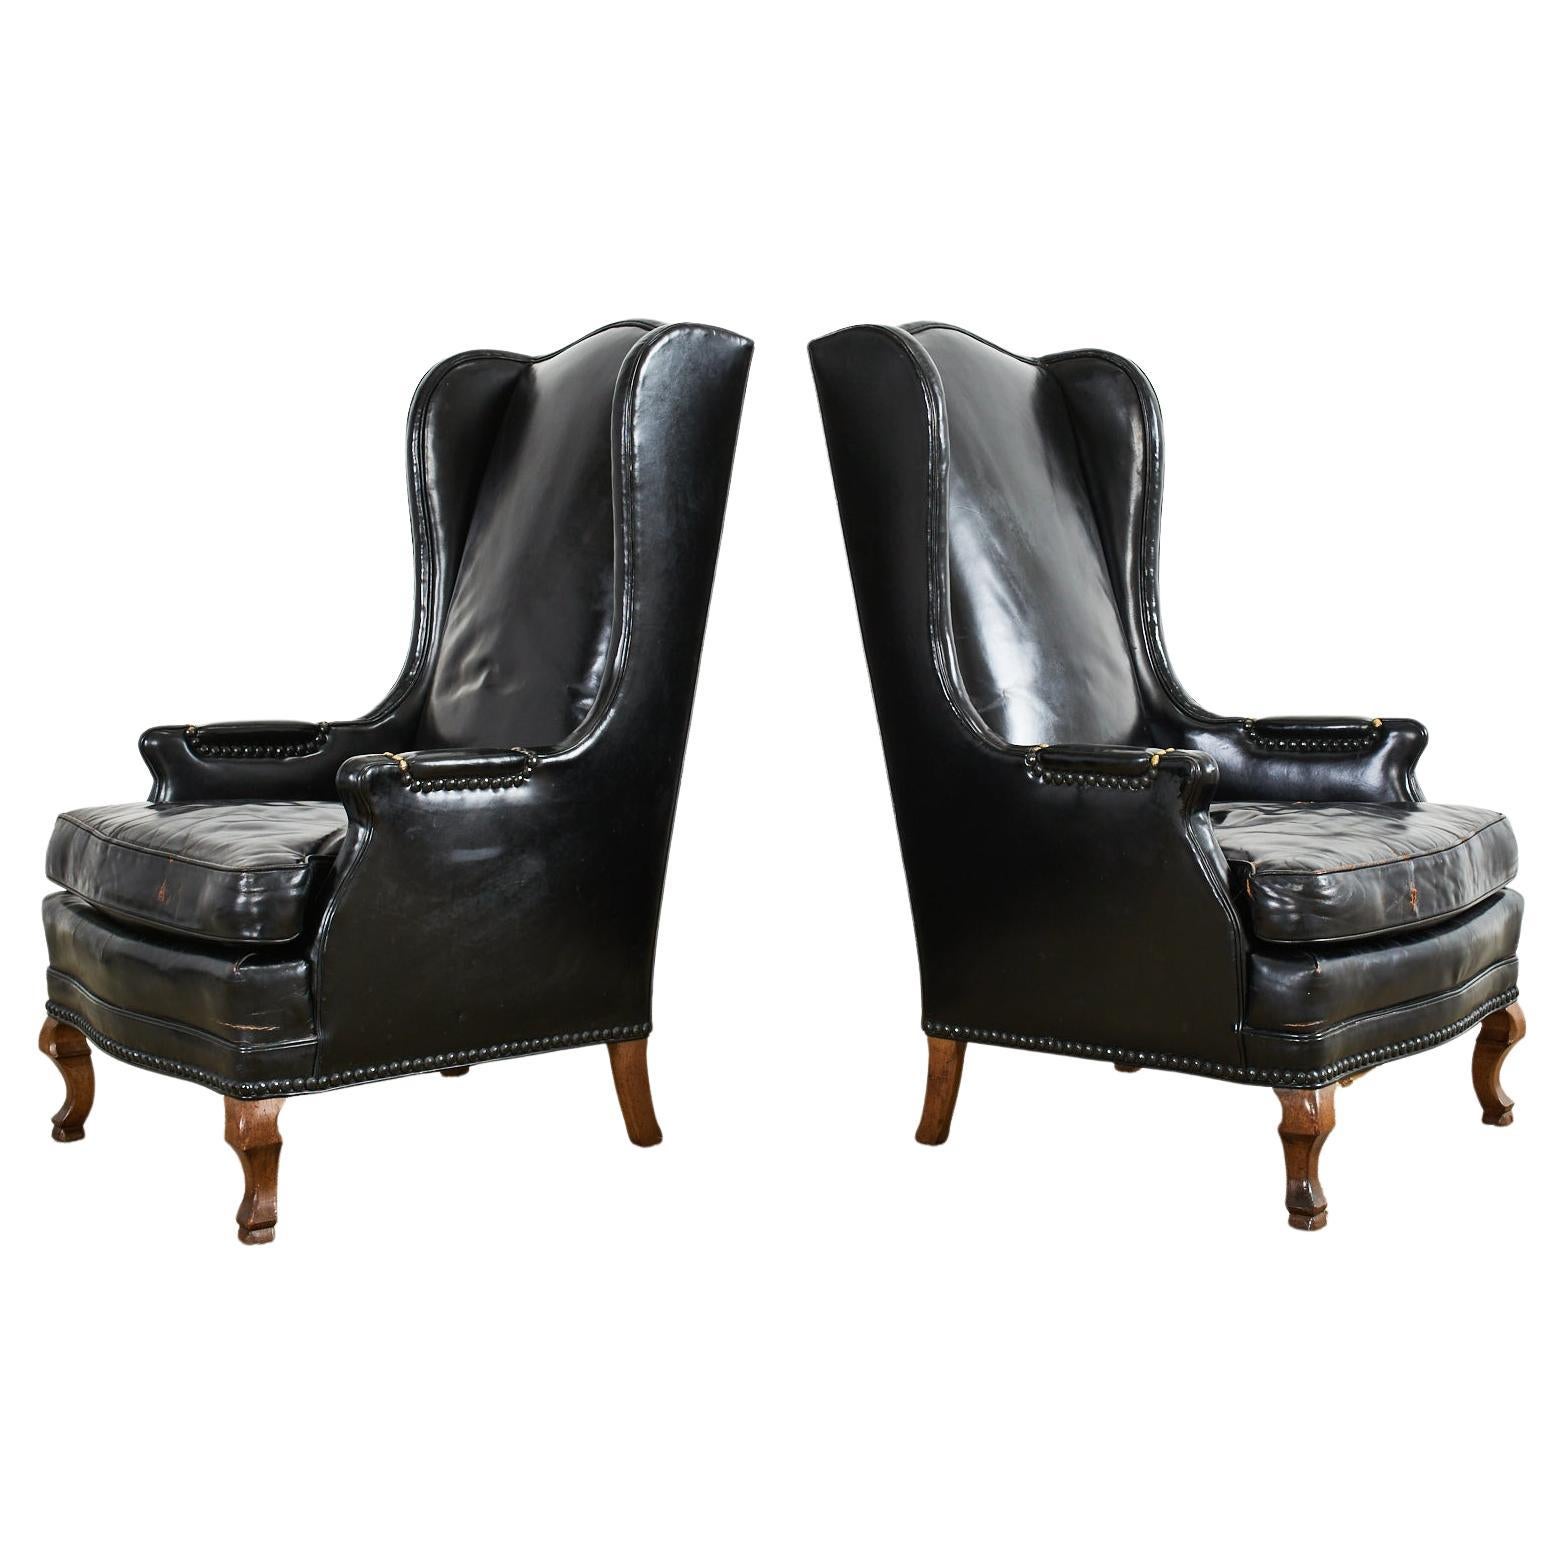 Pair of English Queen Anne Style Black Leather Wingback Chairs